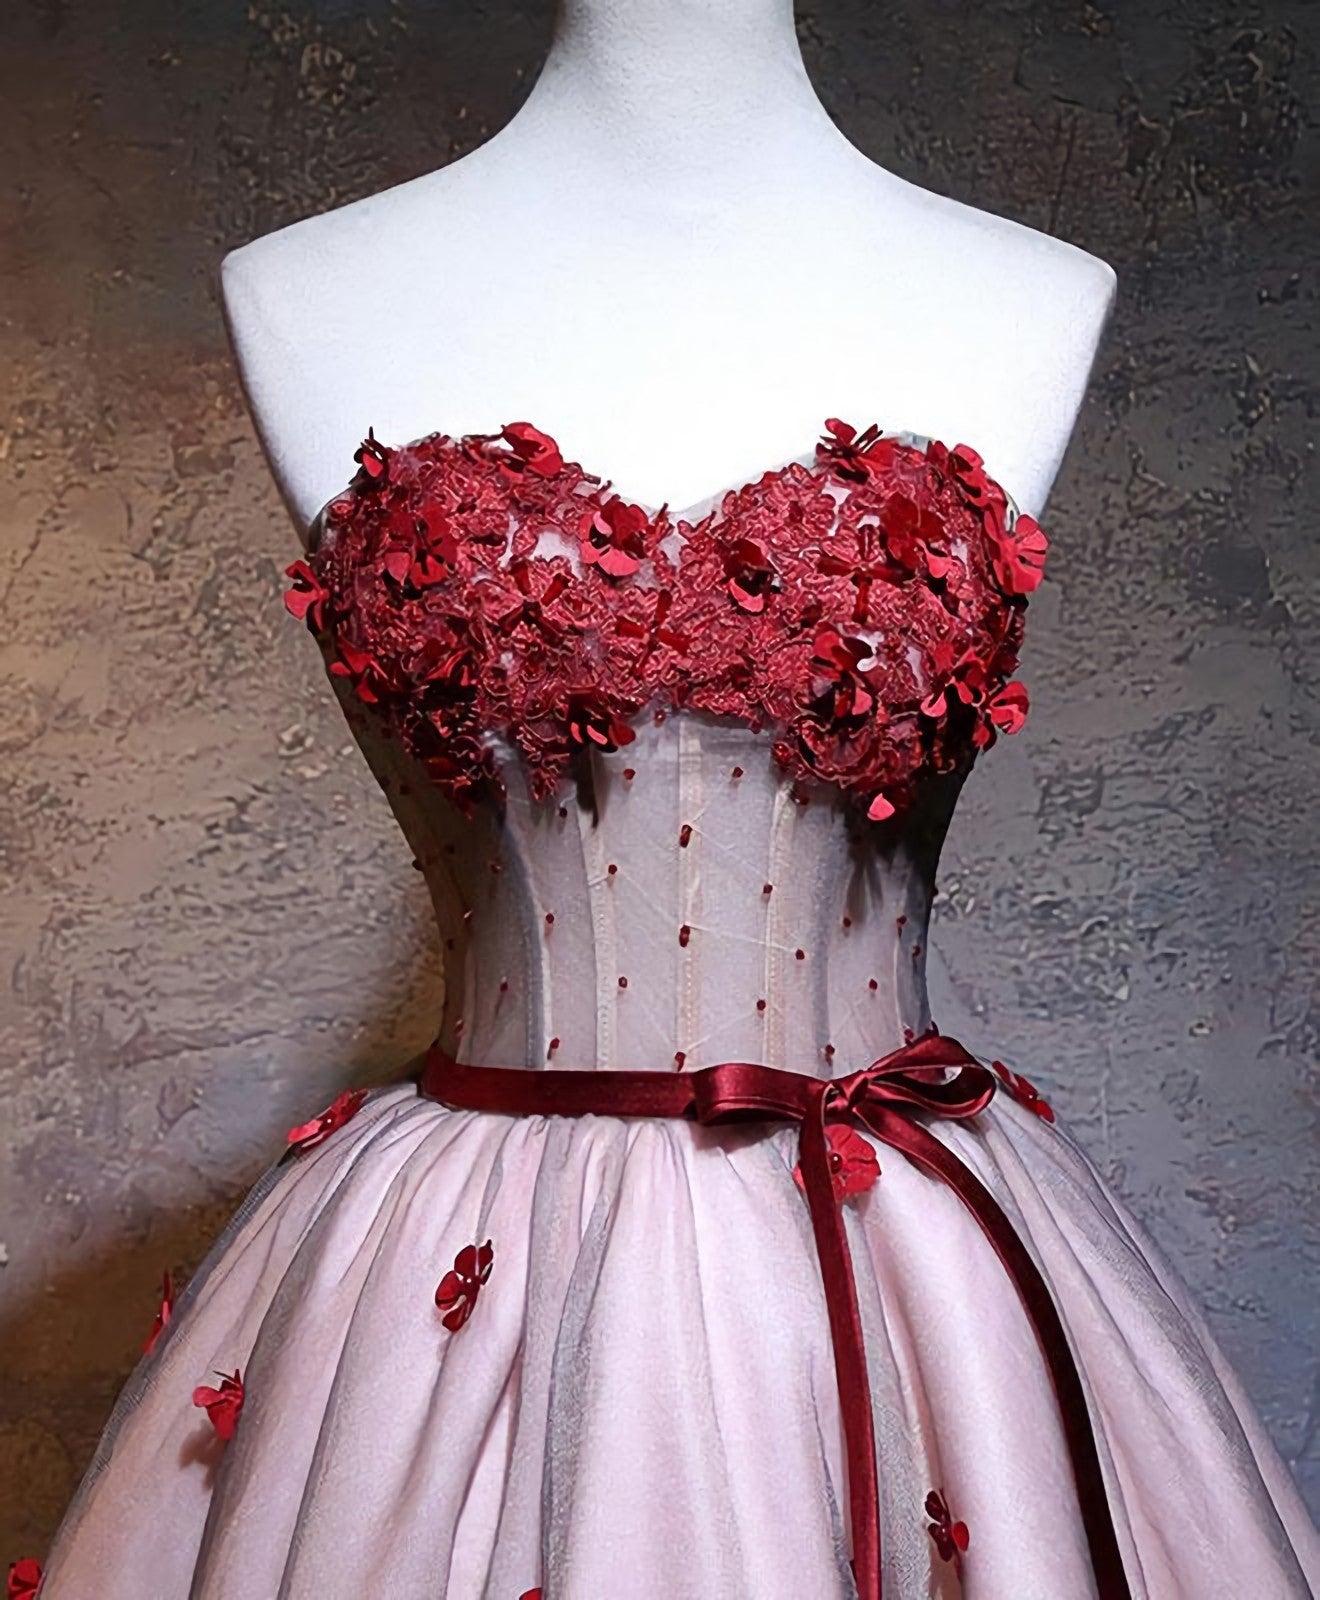 Rustic Wedding Dress, Red Sweetheart Neck Lace Short Prom Dress